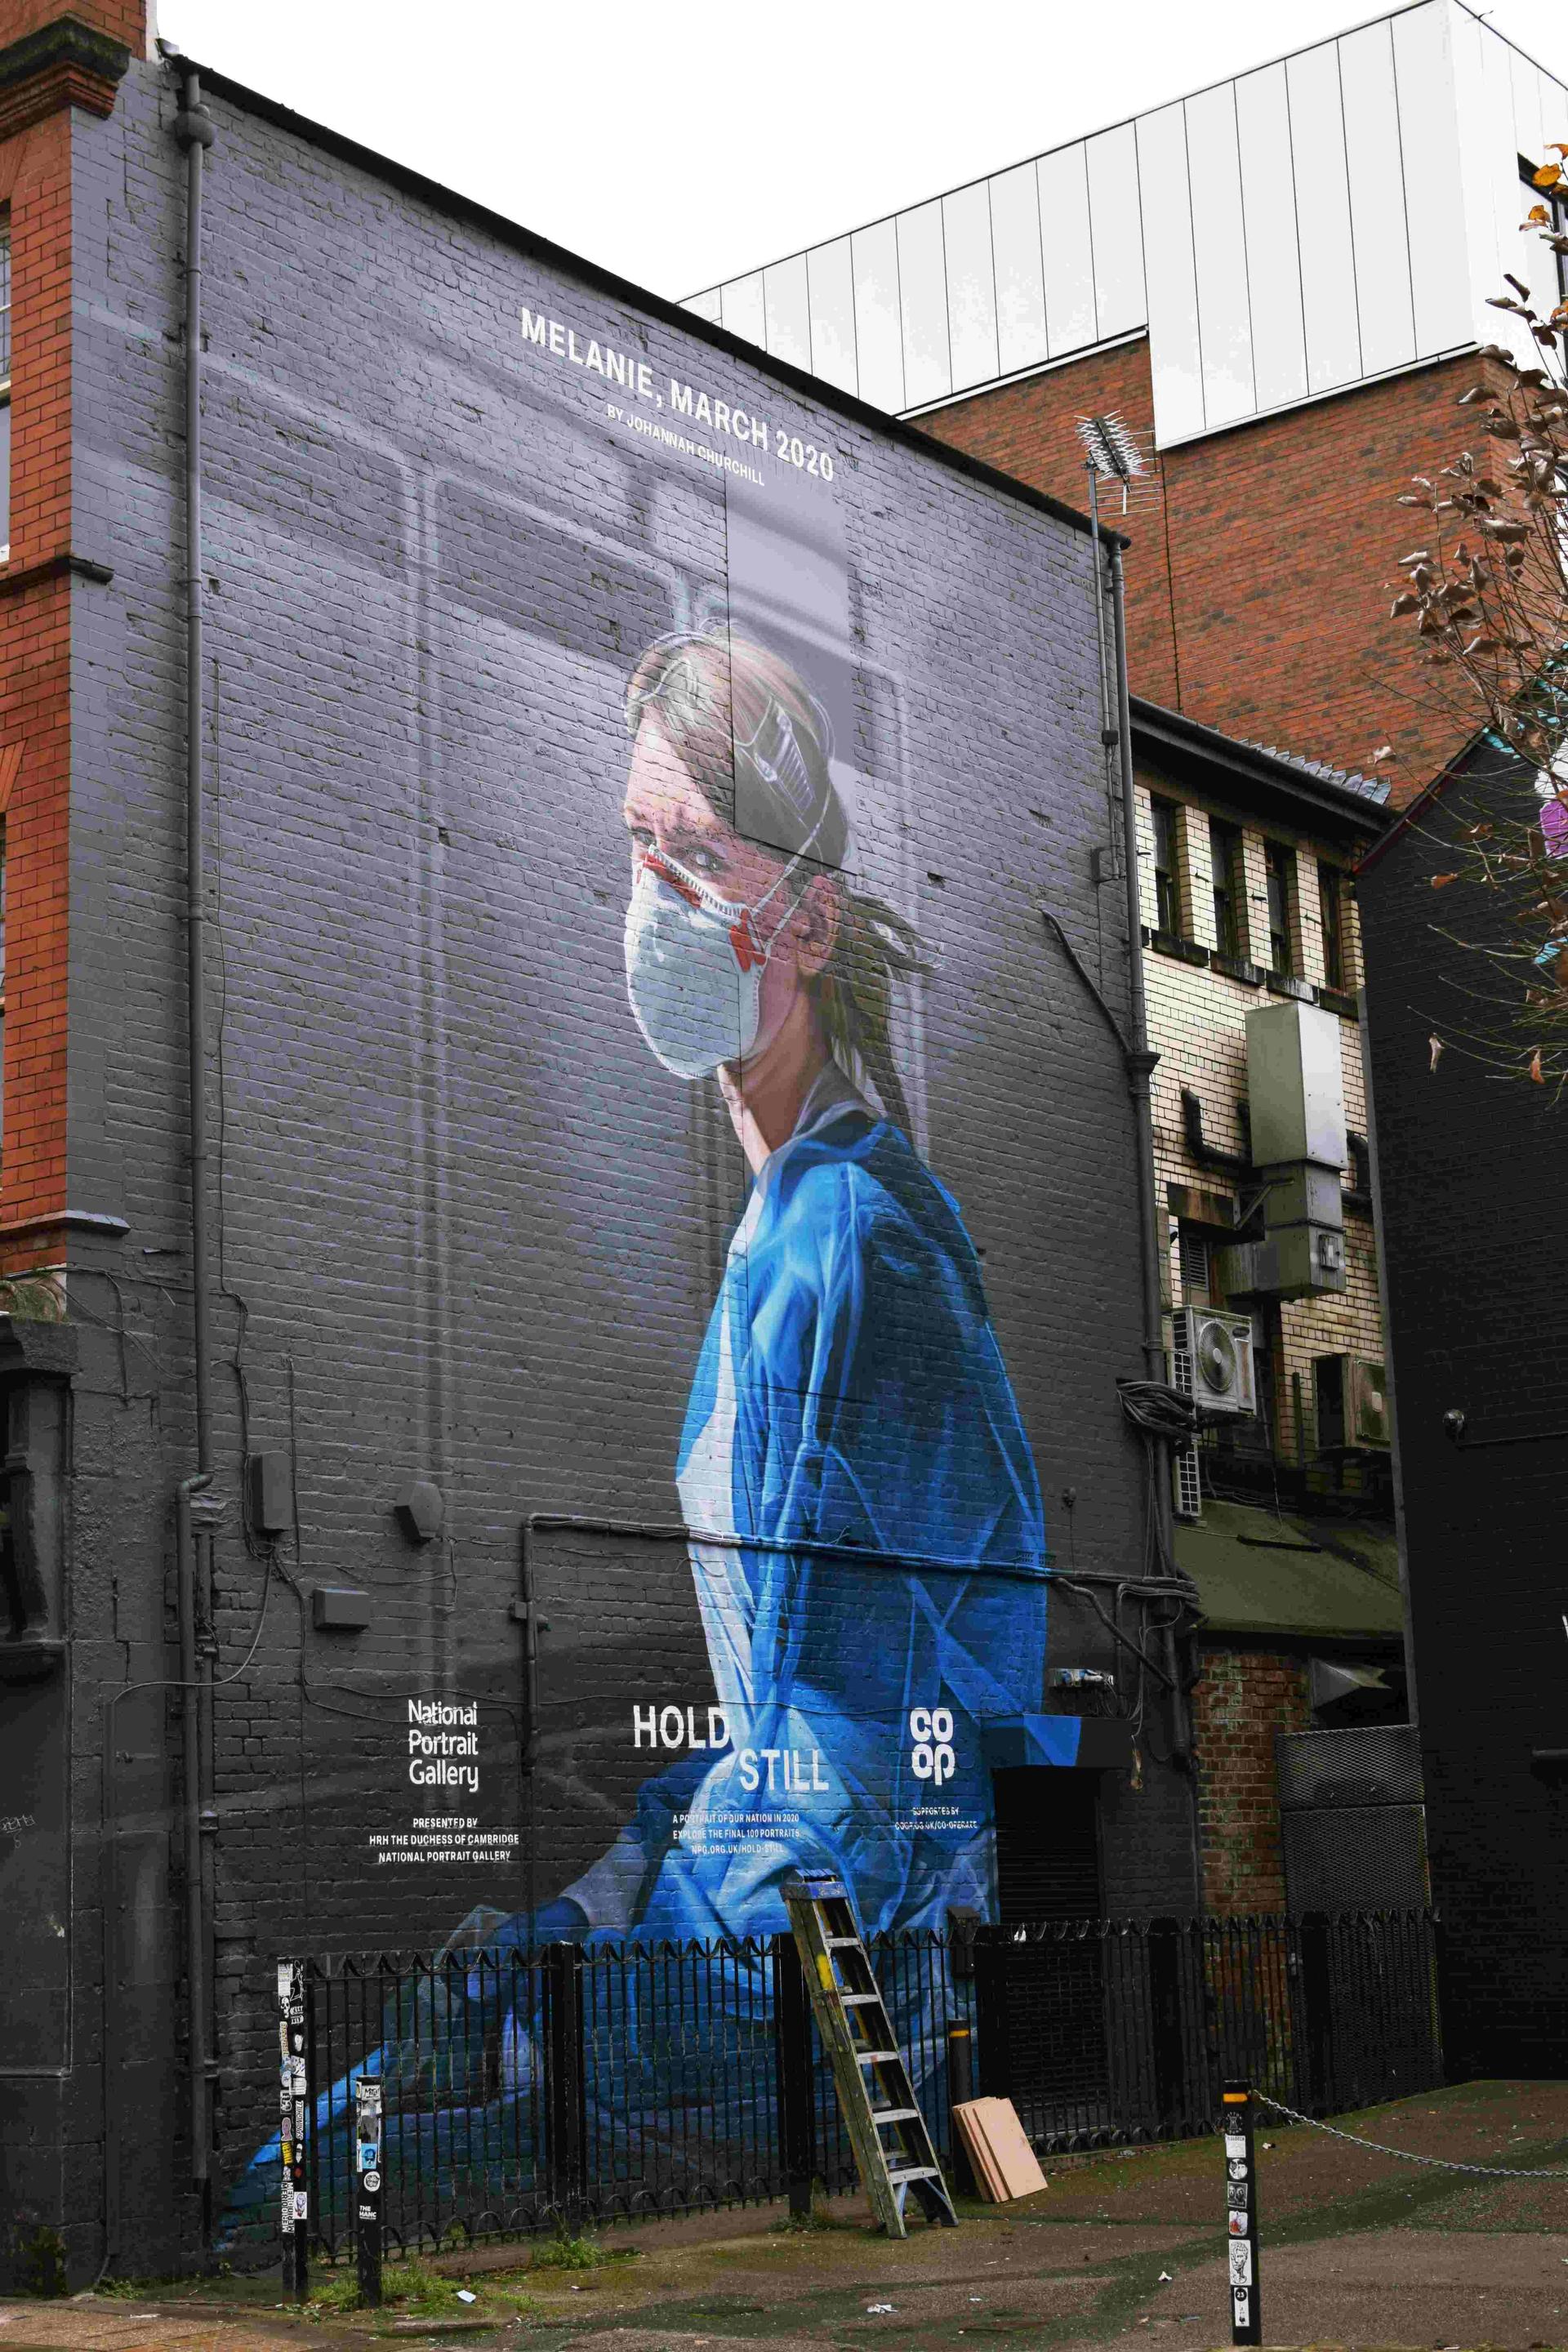 A mural of a NHS worker with a Covid-mask on a wall in UK